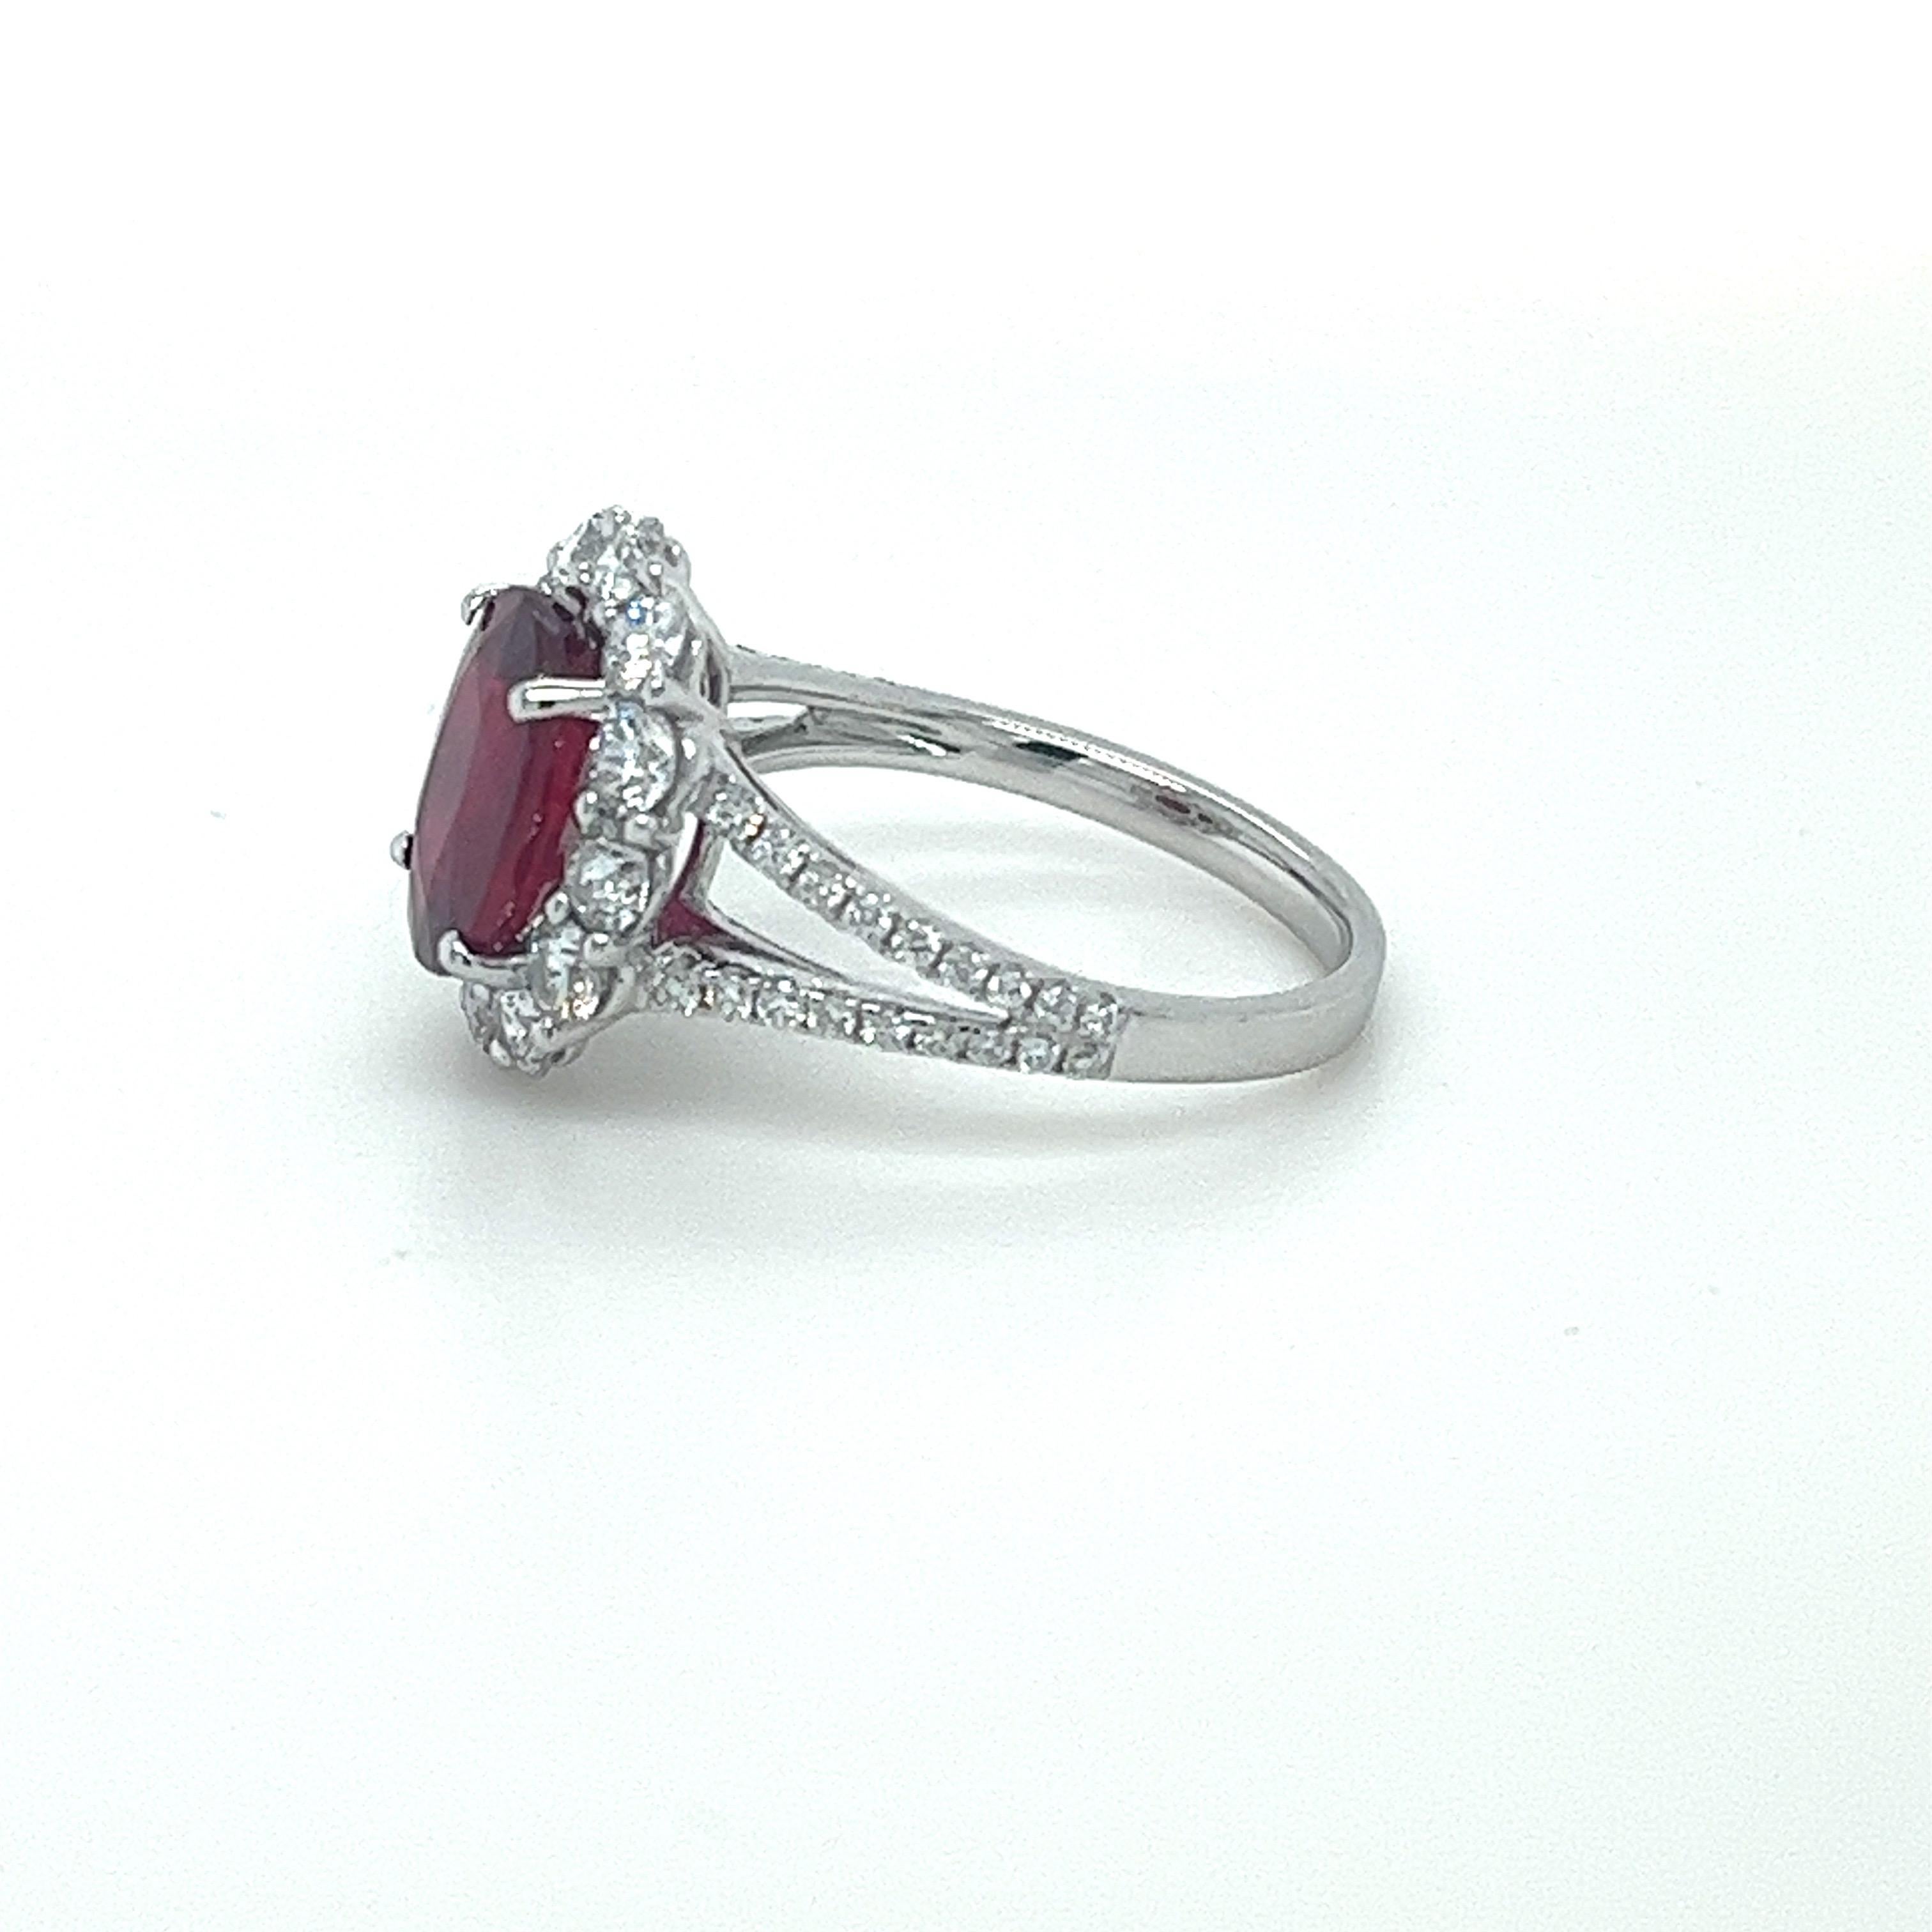 Oval Cut GIA Certified 3.01 Carat Oval Ruby & Diamond Ring in 18 Karat White Gold For Sale